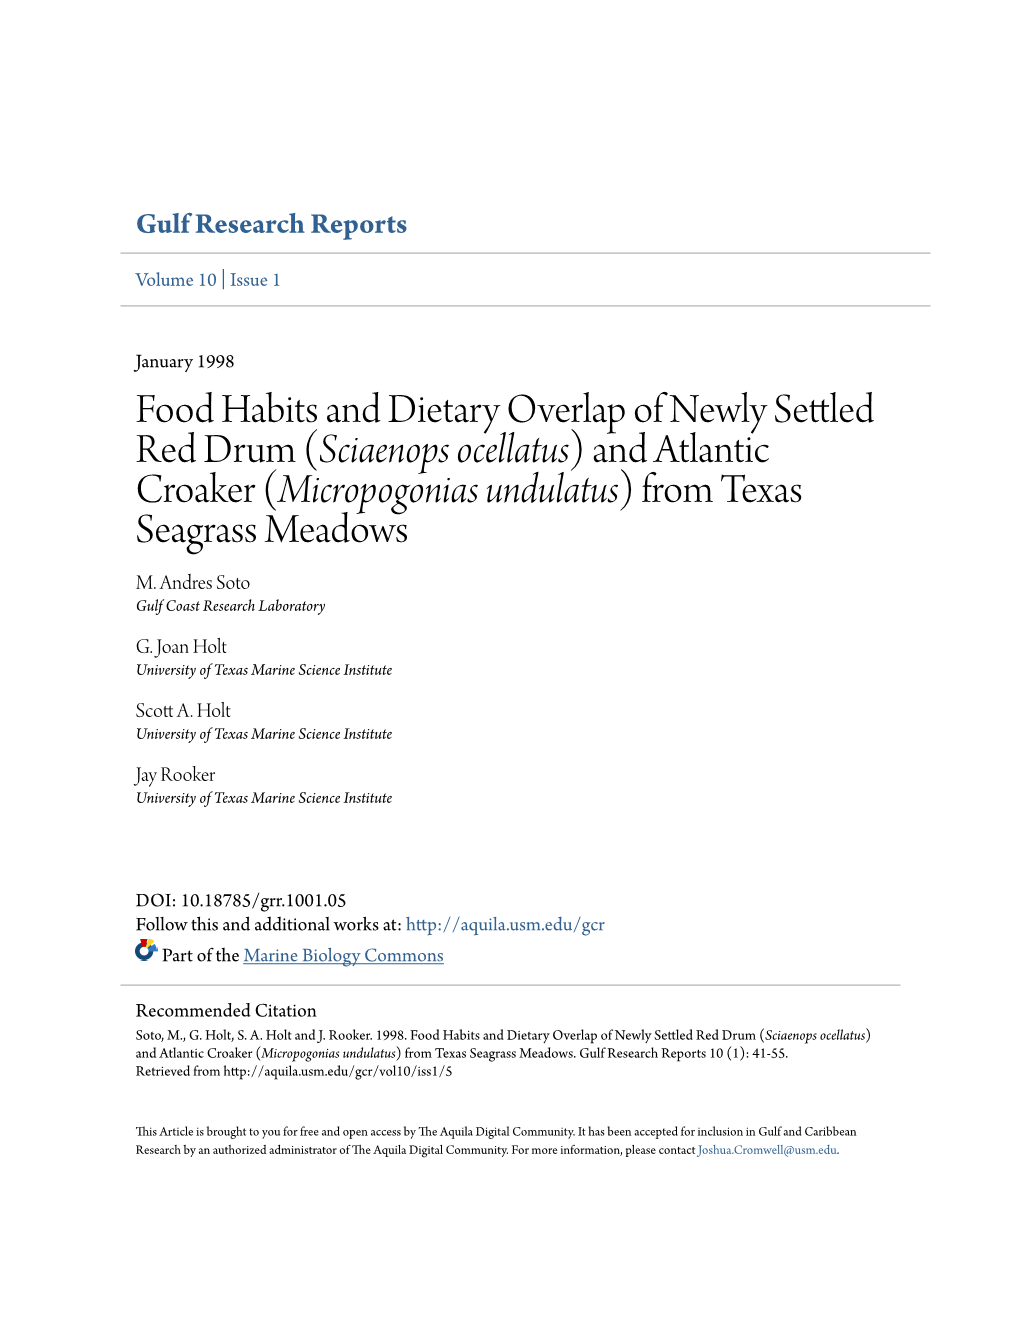 Food Habits and Dietary Overlap of Newly Settled Red Drum (Sciaenops Ocellatus) and Atlantic Croaker (Micropogonias Undulatus) from Texas Seagrass Meadows M